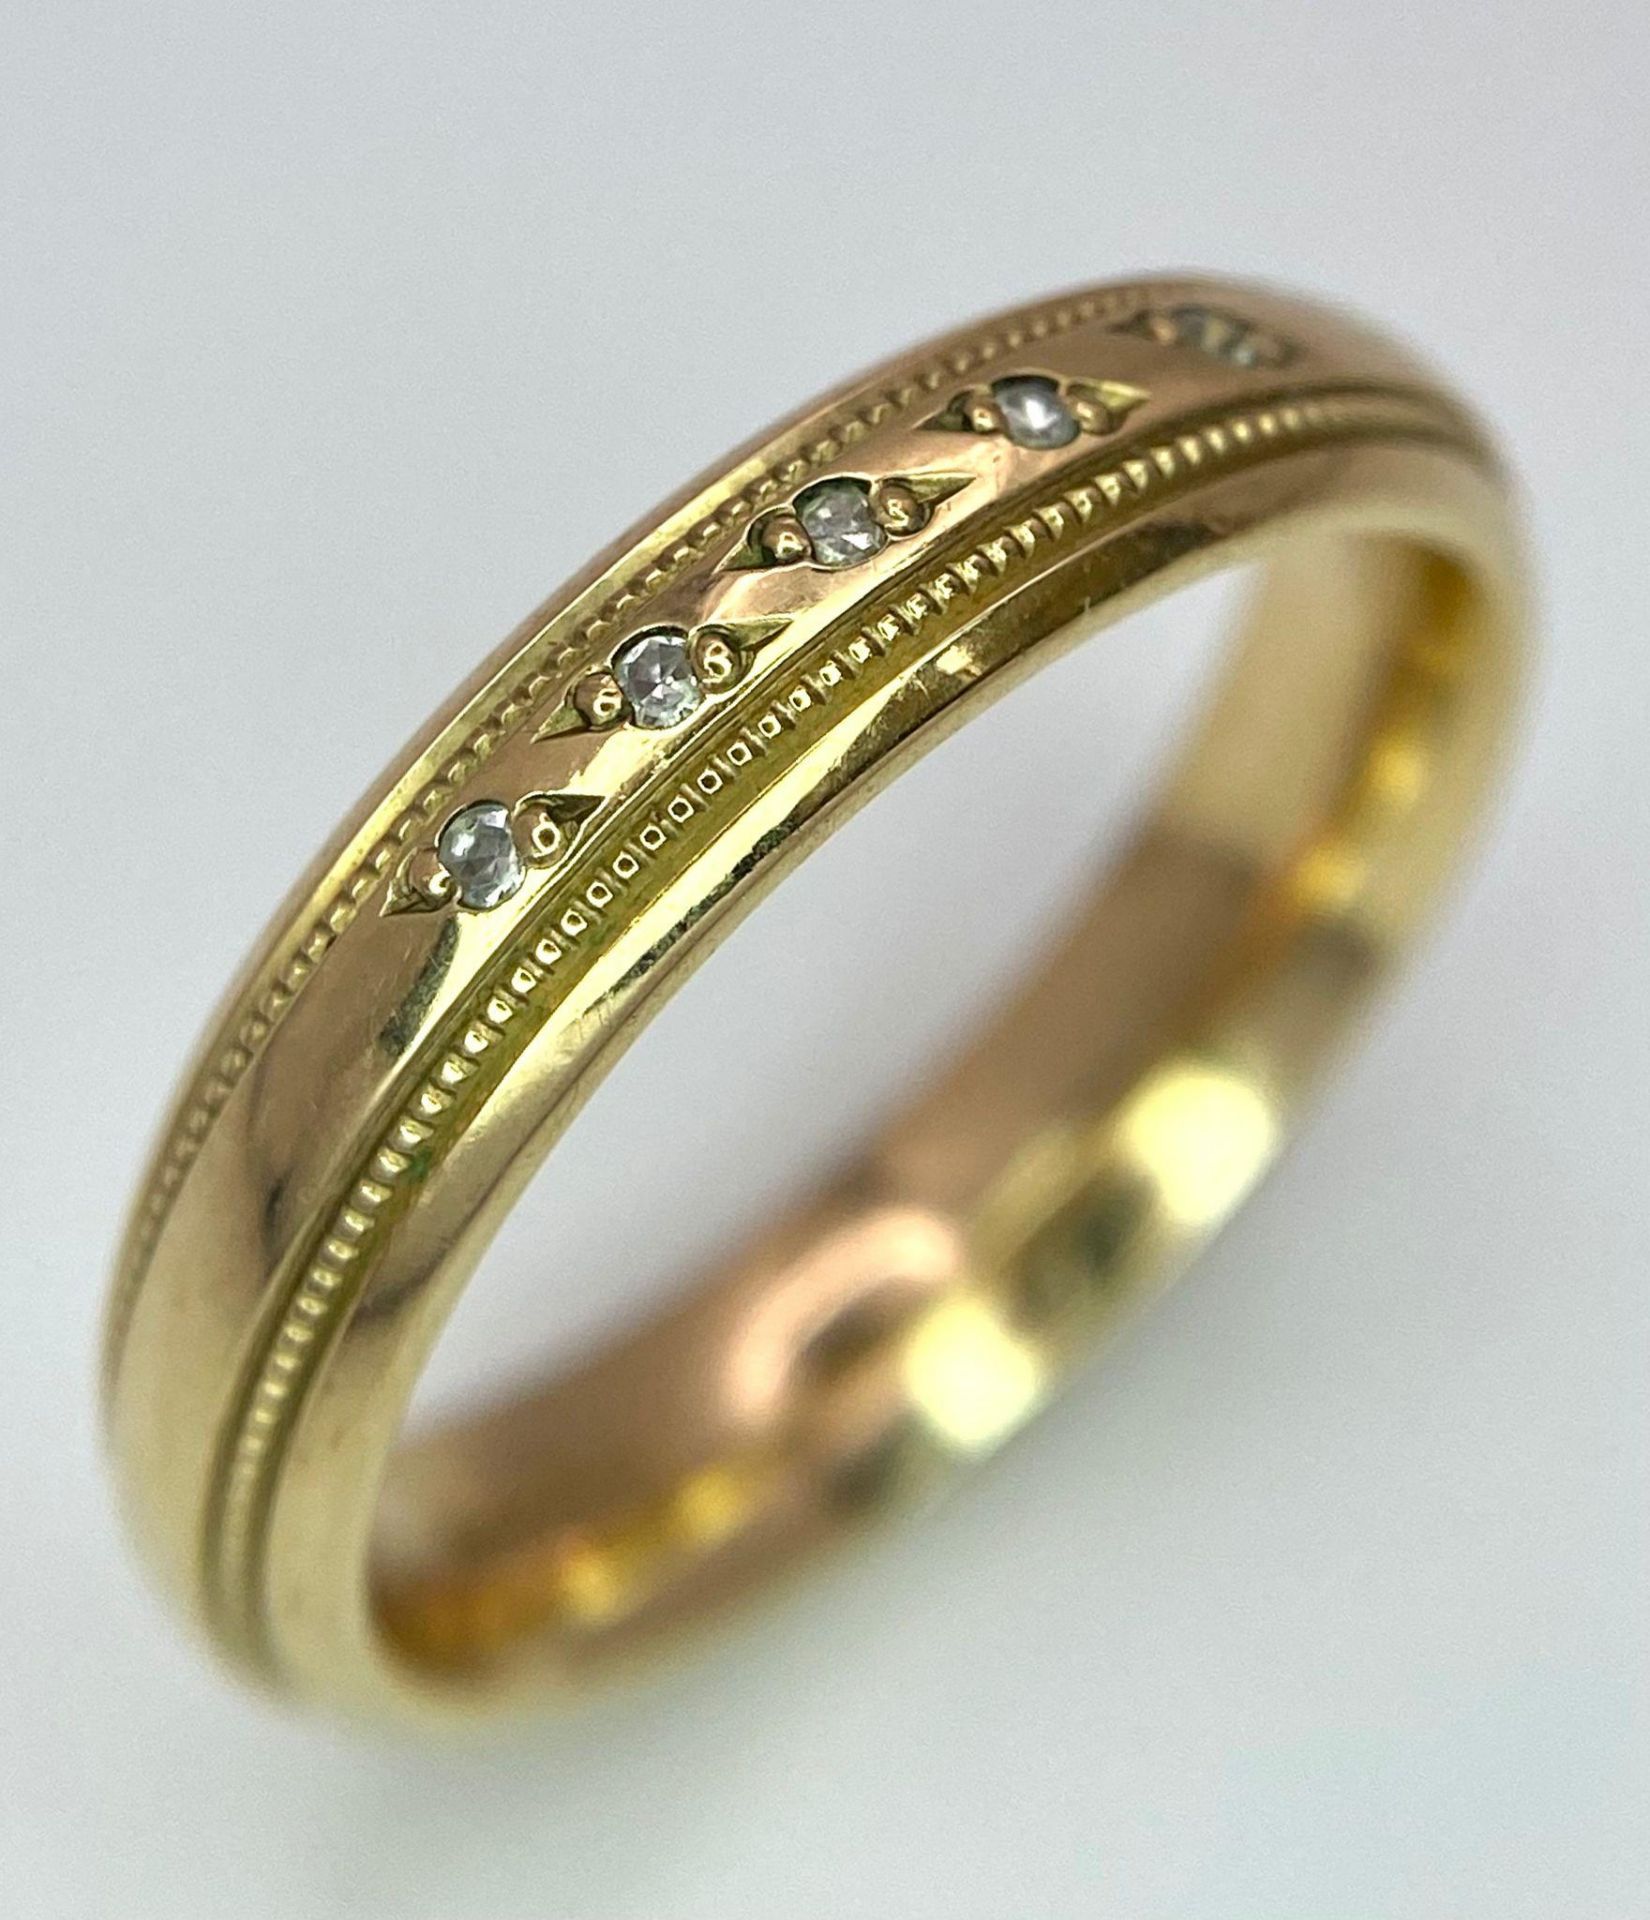 A Vintage 9K Yellow Gold Five Stone Diamond Ring. Size L. 3.75g weight. Full UK hallmarks.